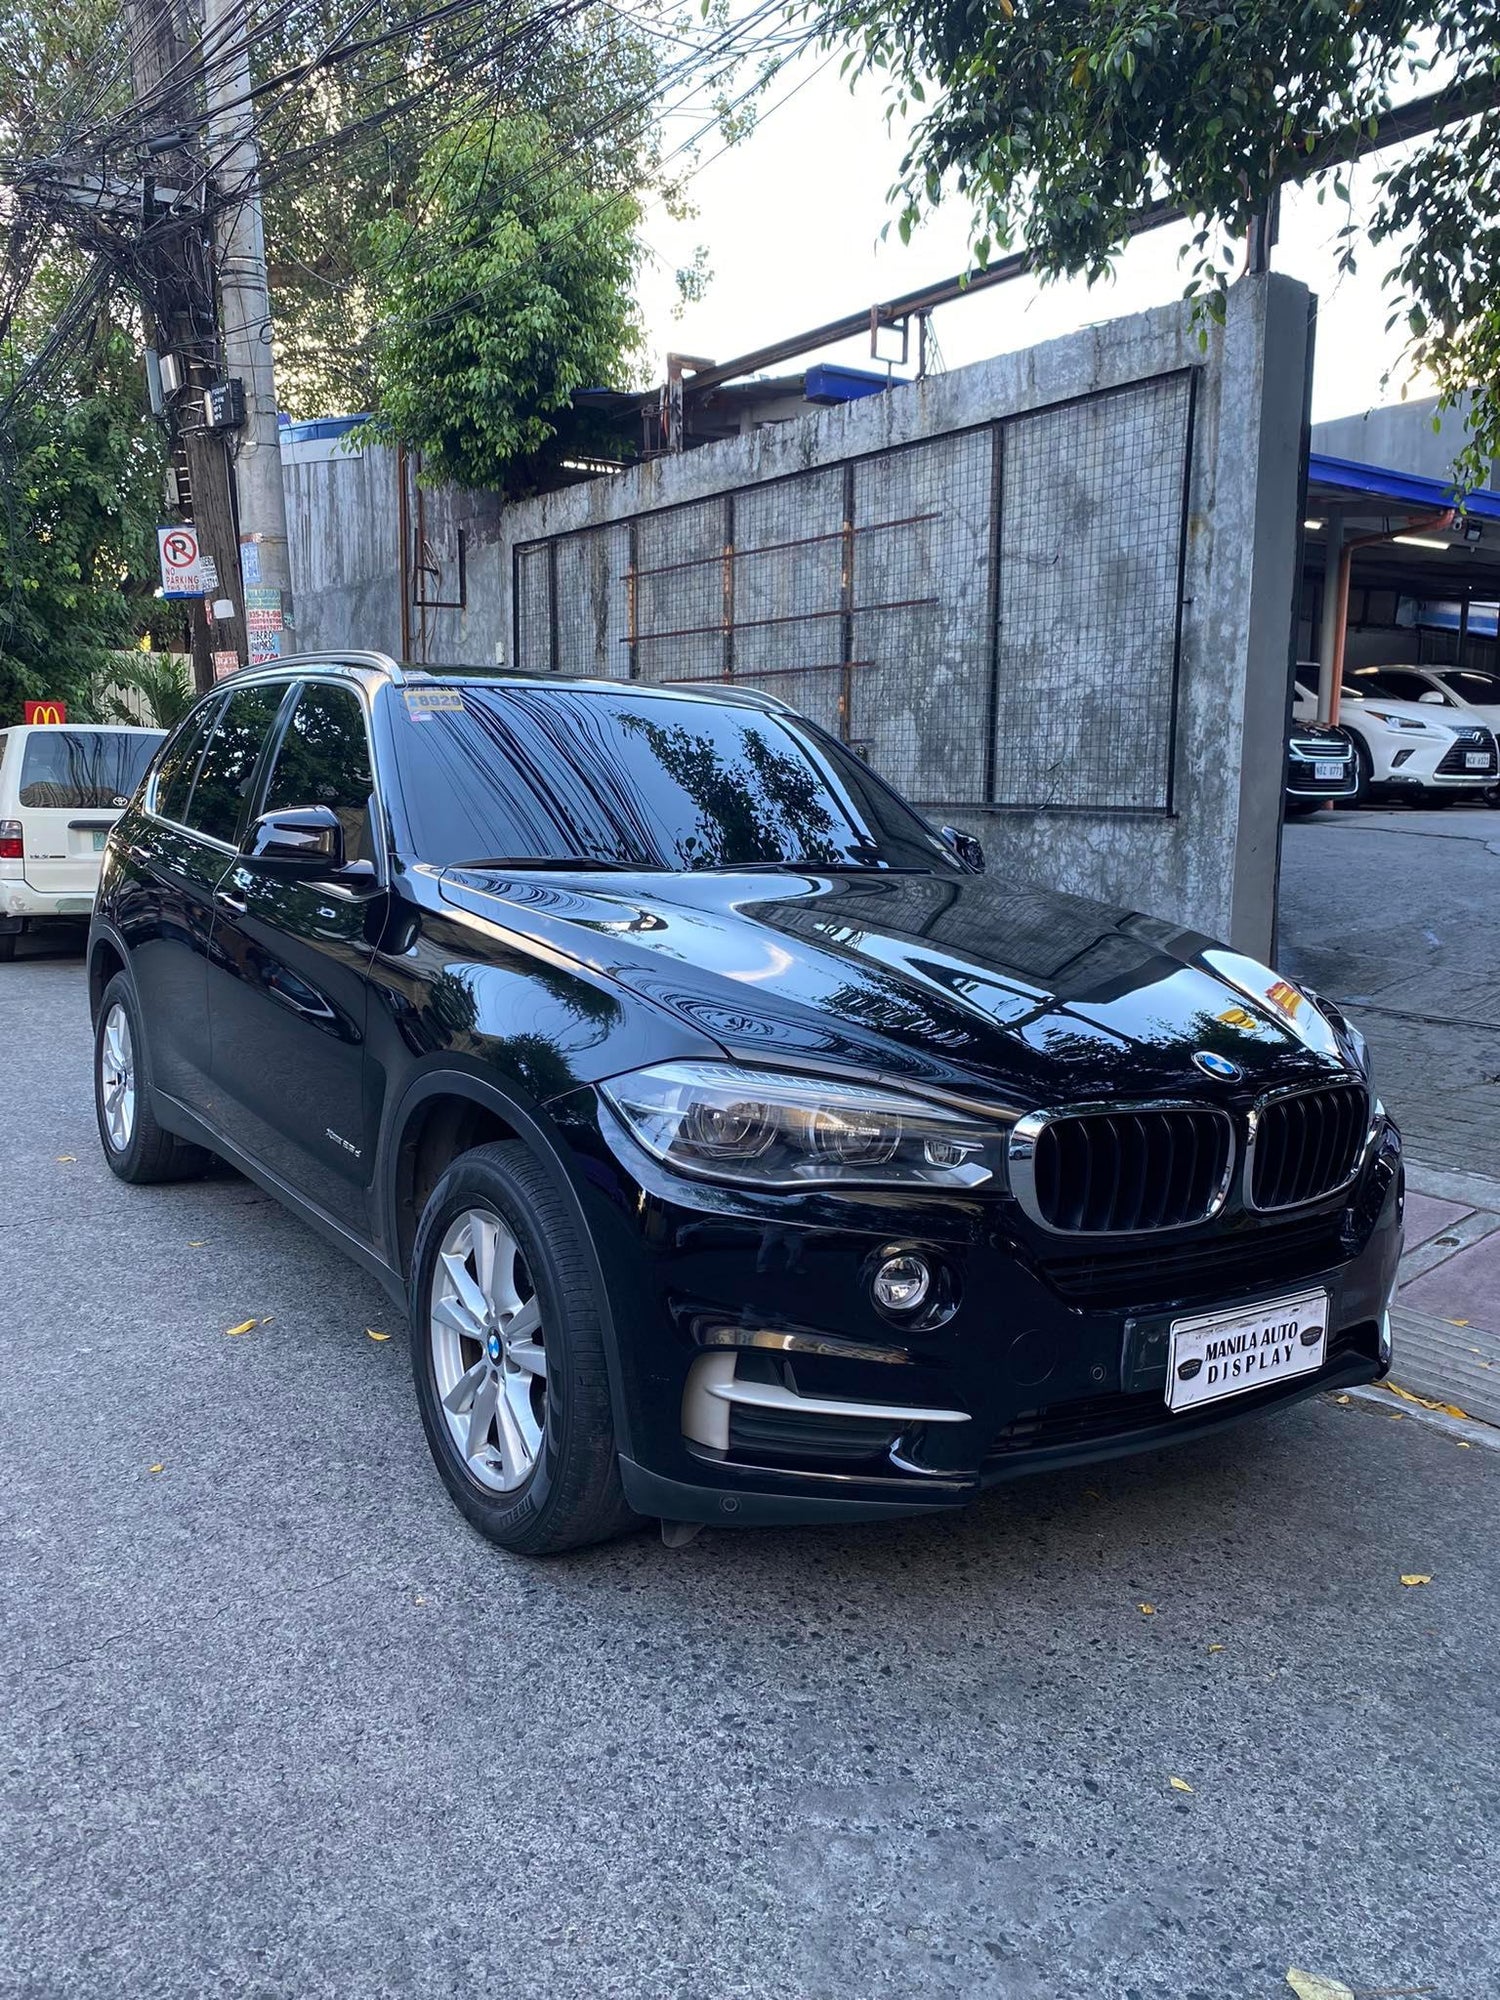 2017 BMW X5 XDRIVE 25D AUTOMATIC TRANSMISSION | Secondhand Used Cars for Sale at Manila Auto Display.